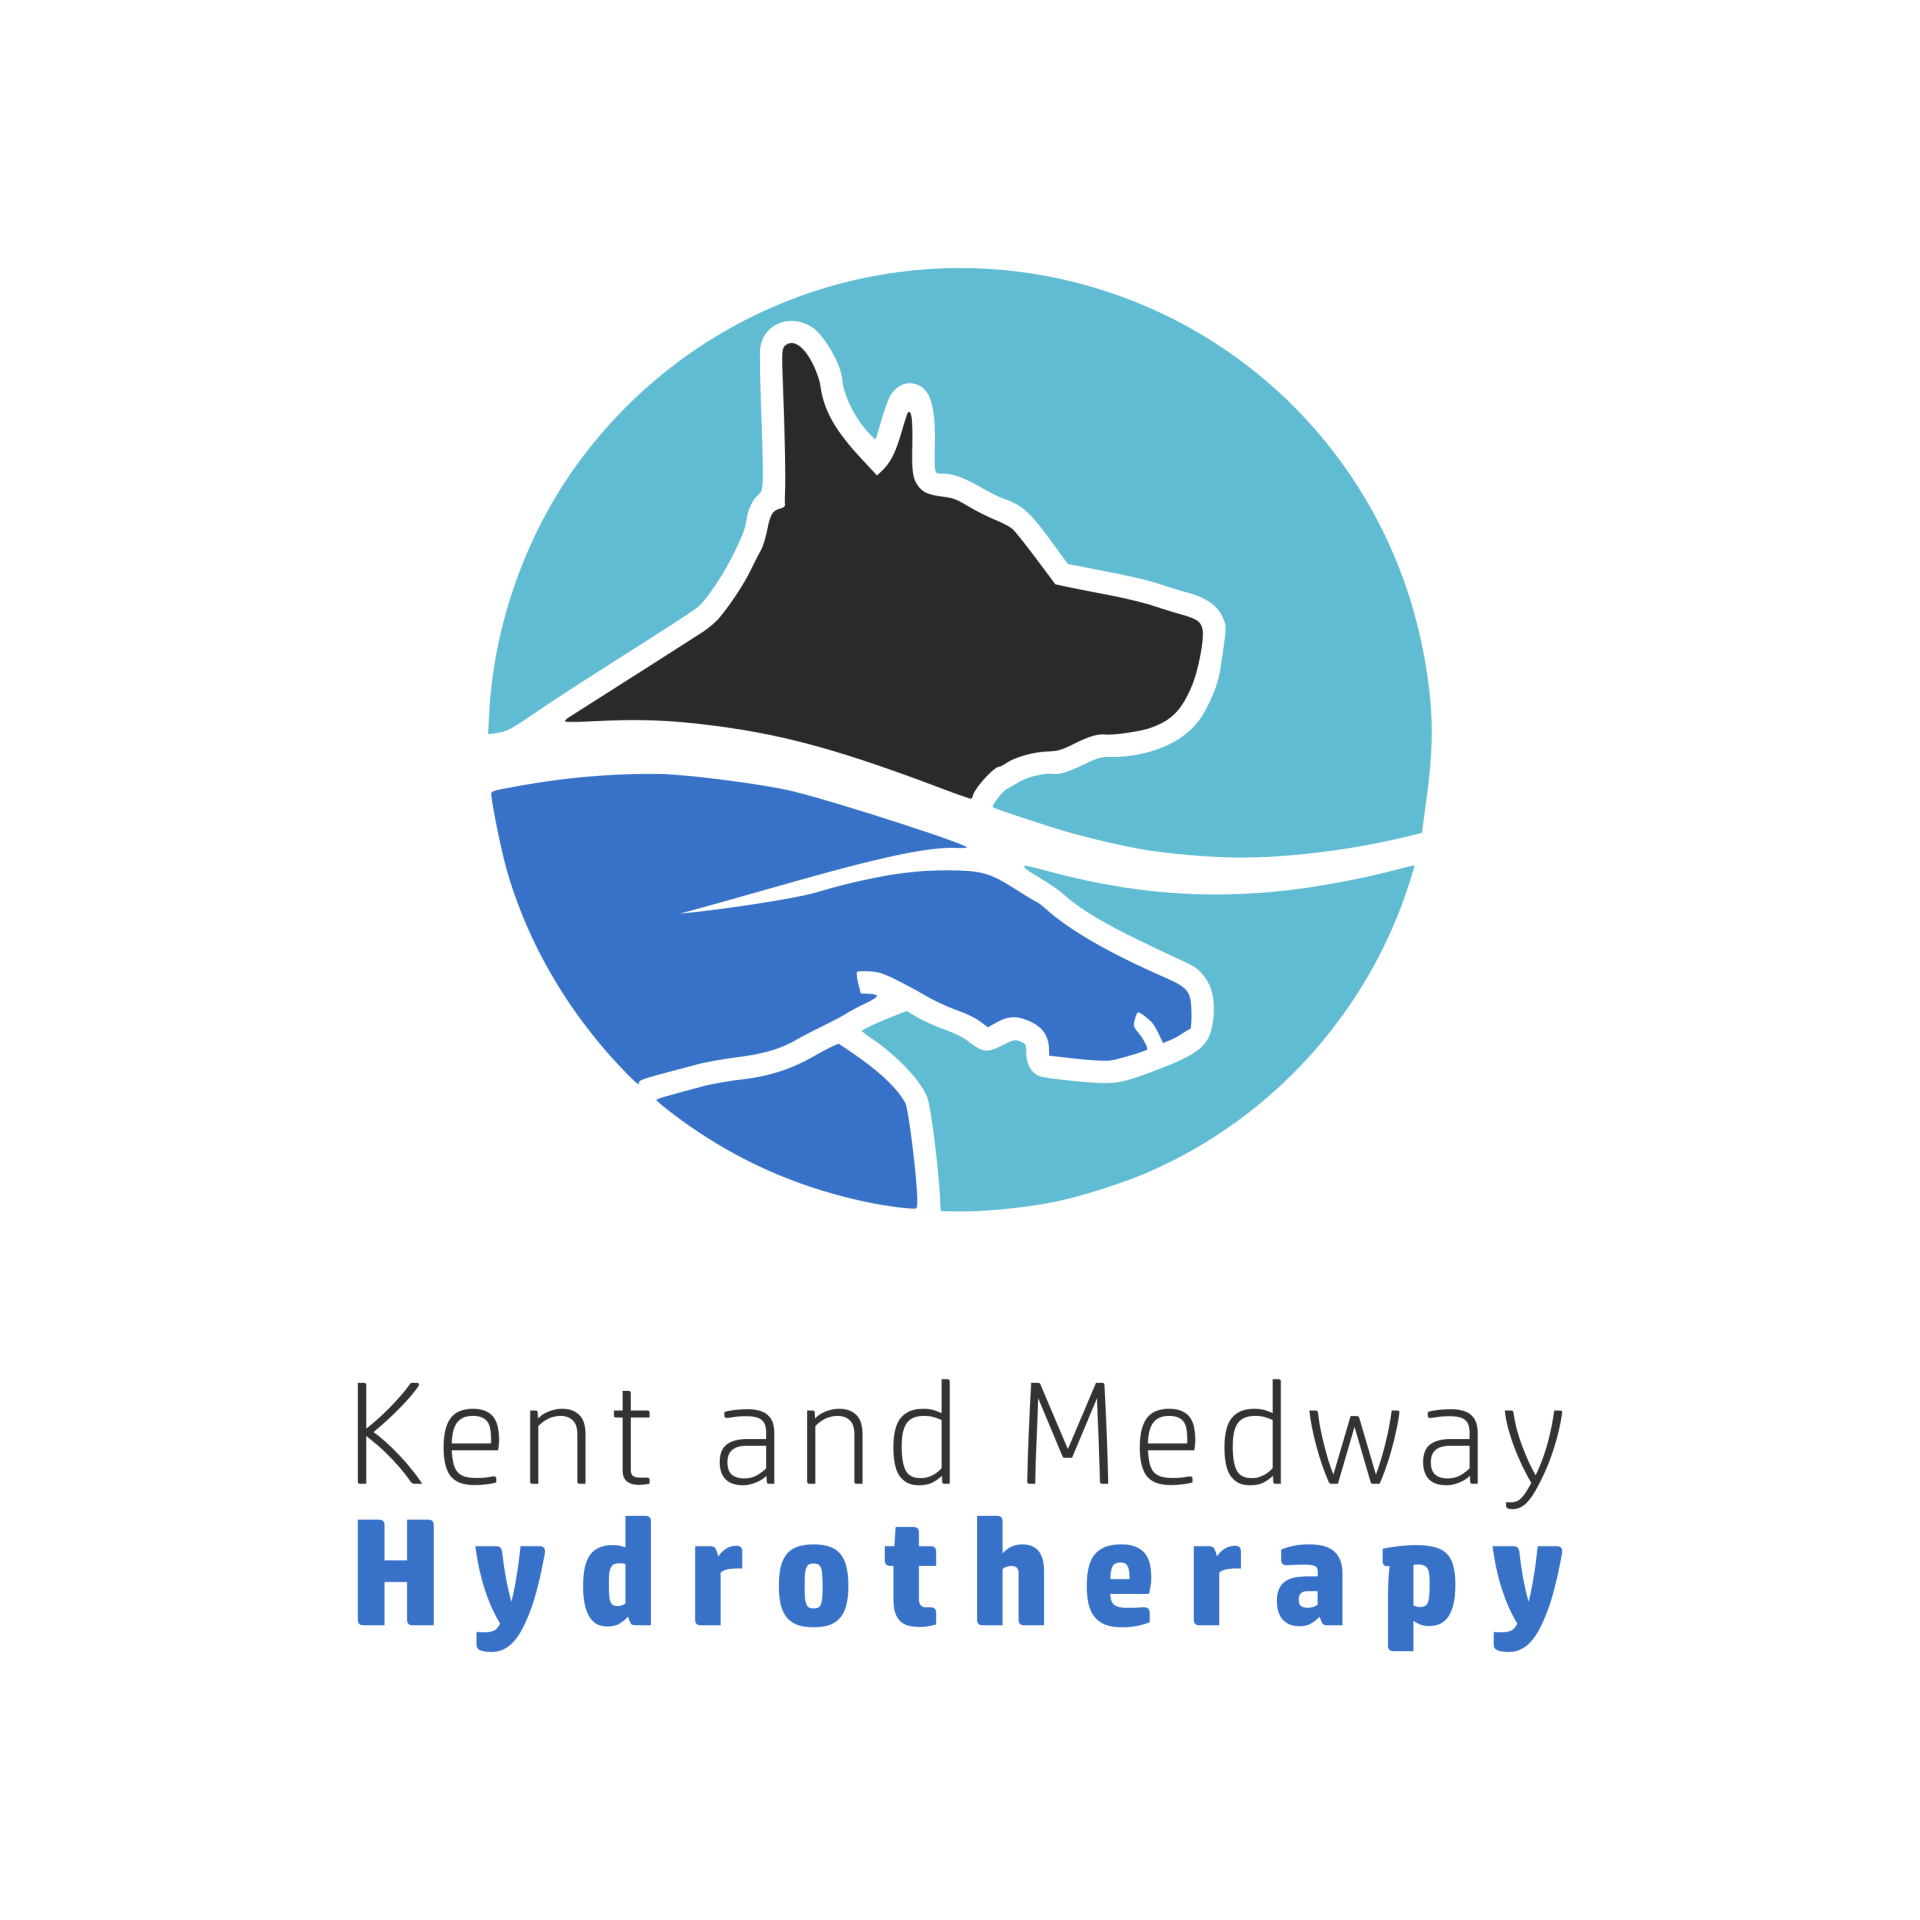 Kent and Medway Hydrotherapy